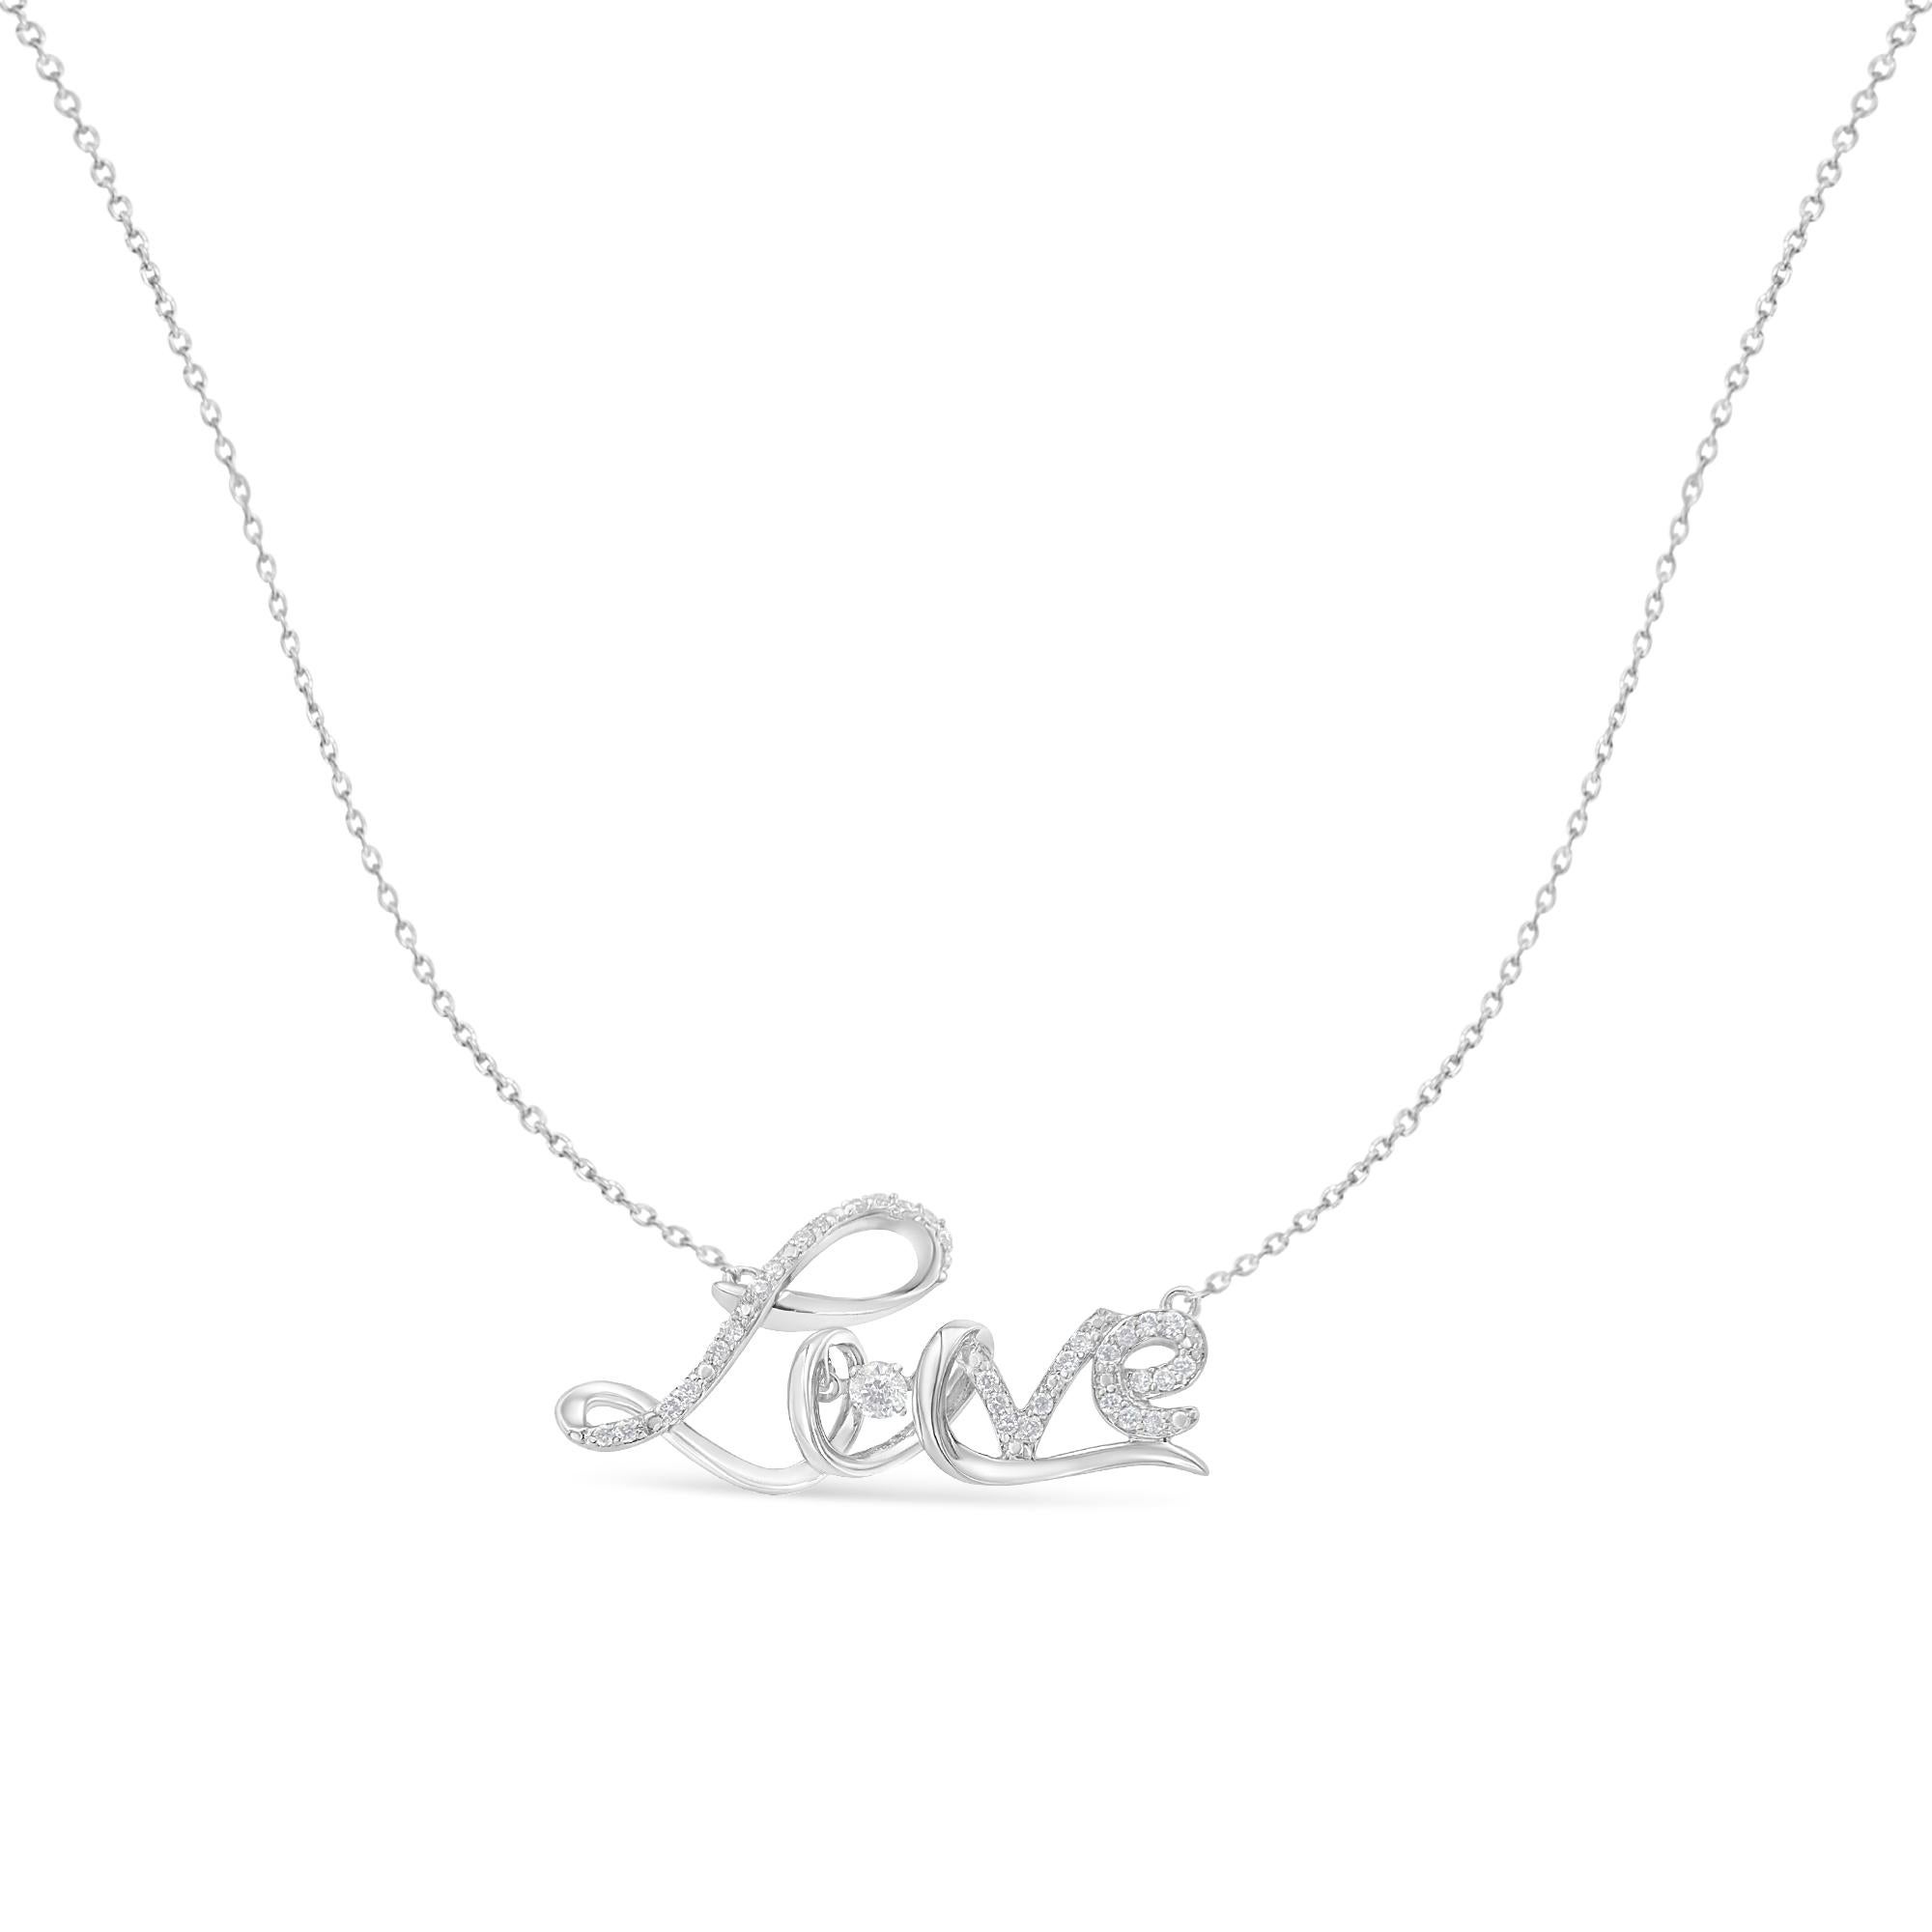 Created in polished sterling silver, this lovely design features 1/4 carat TDW of round cut diamonds. The word love is spelled out in a flowing font that is inlaid with shimmering diamonds while a  larger diamond sits in the place of the 